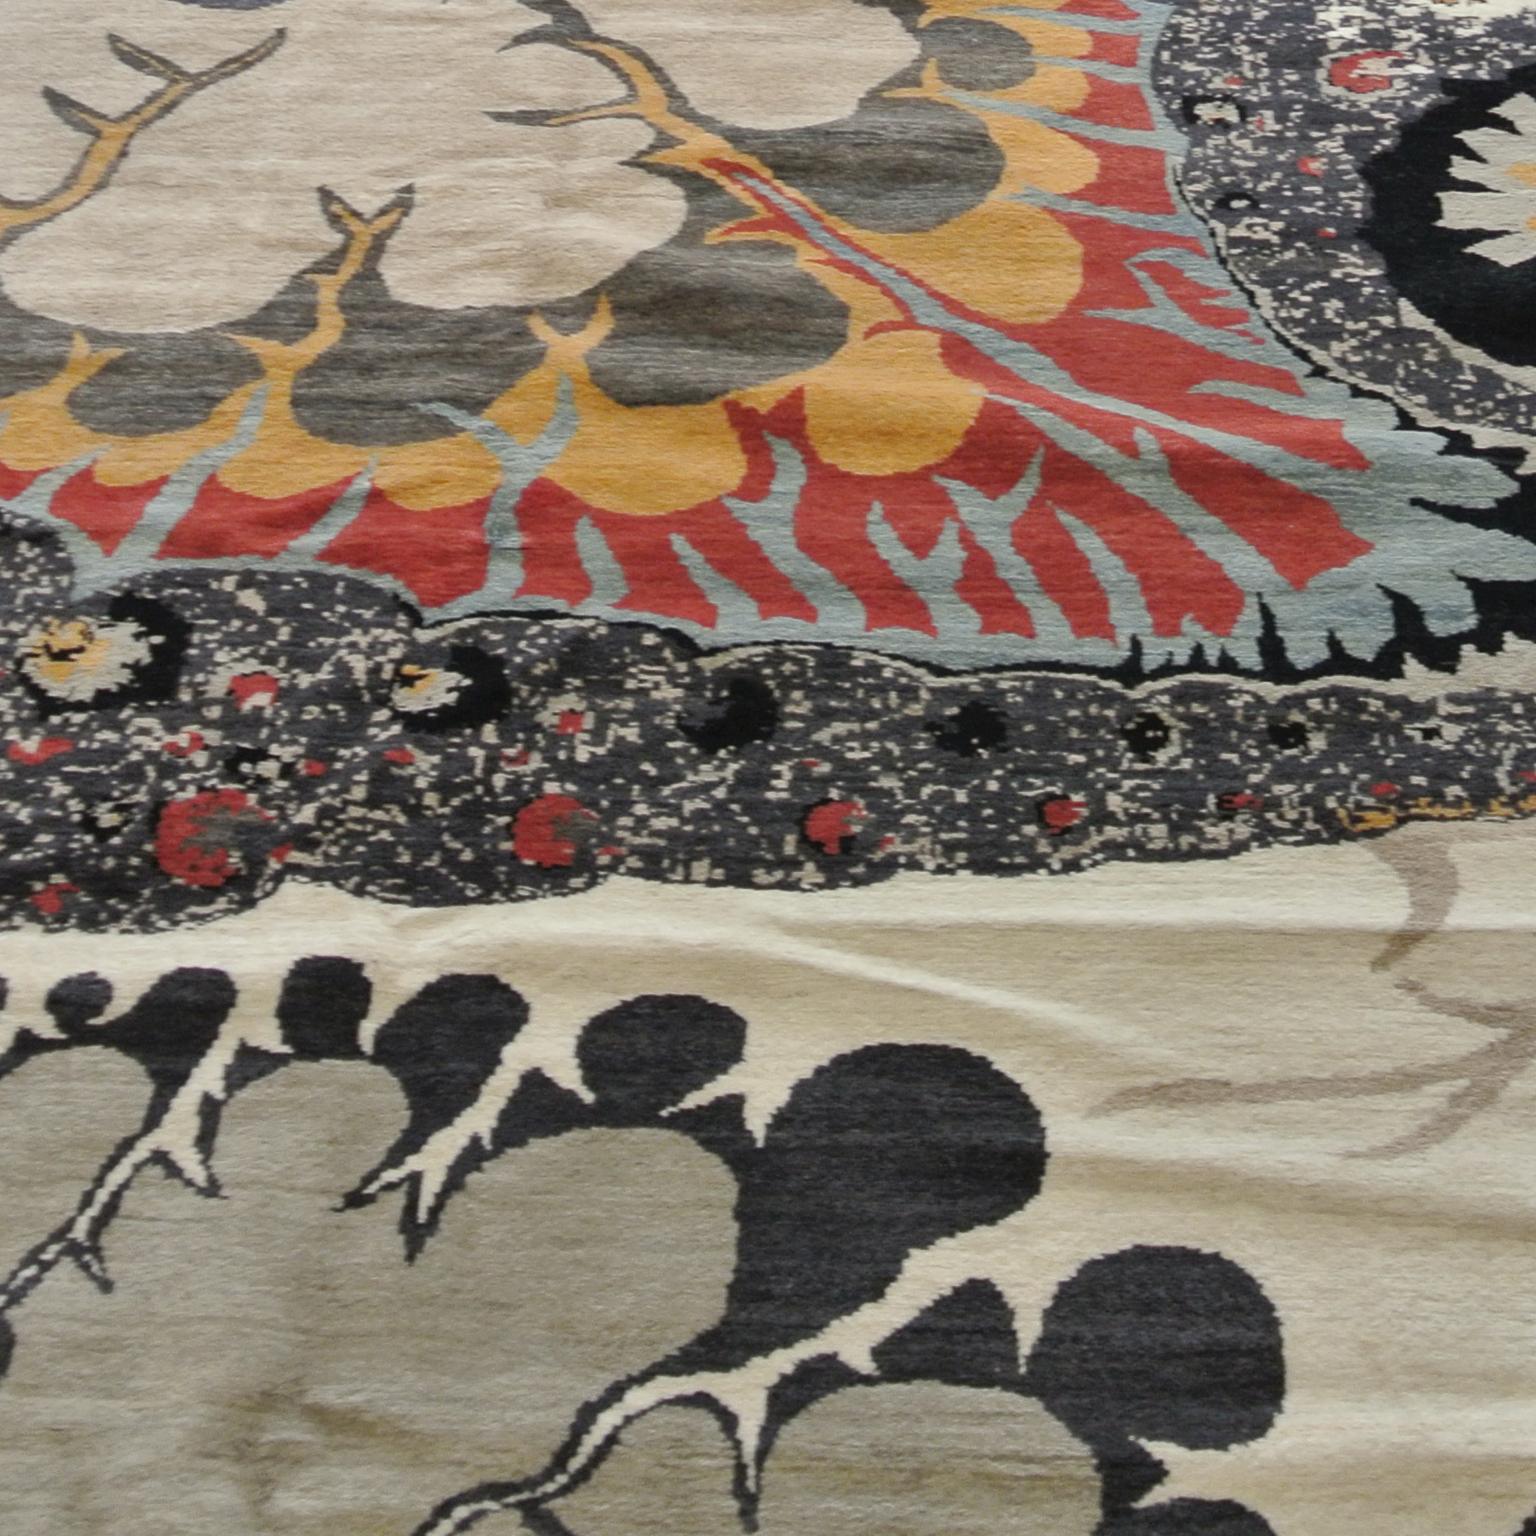 Vegetable Dyed Orley Shabahang Signature “Synergy” Carpet in Pure Handspun Wool, Organic Dyes